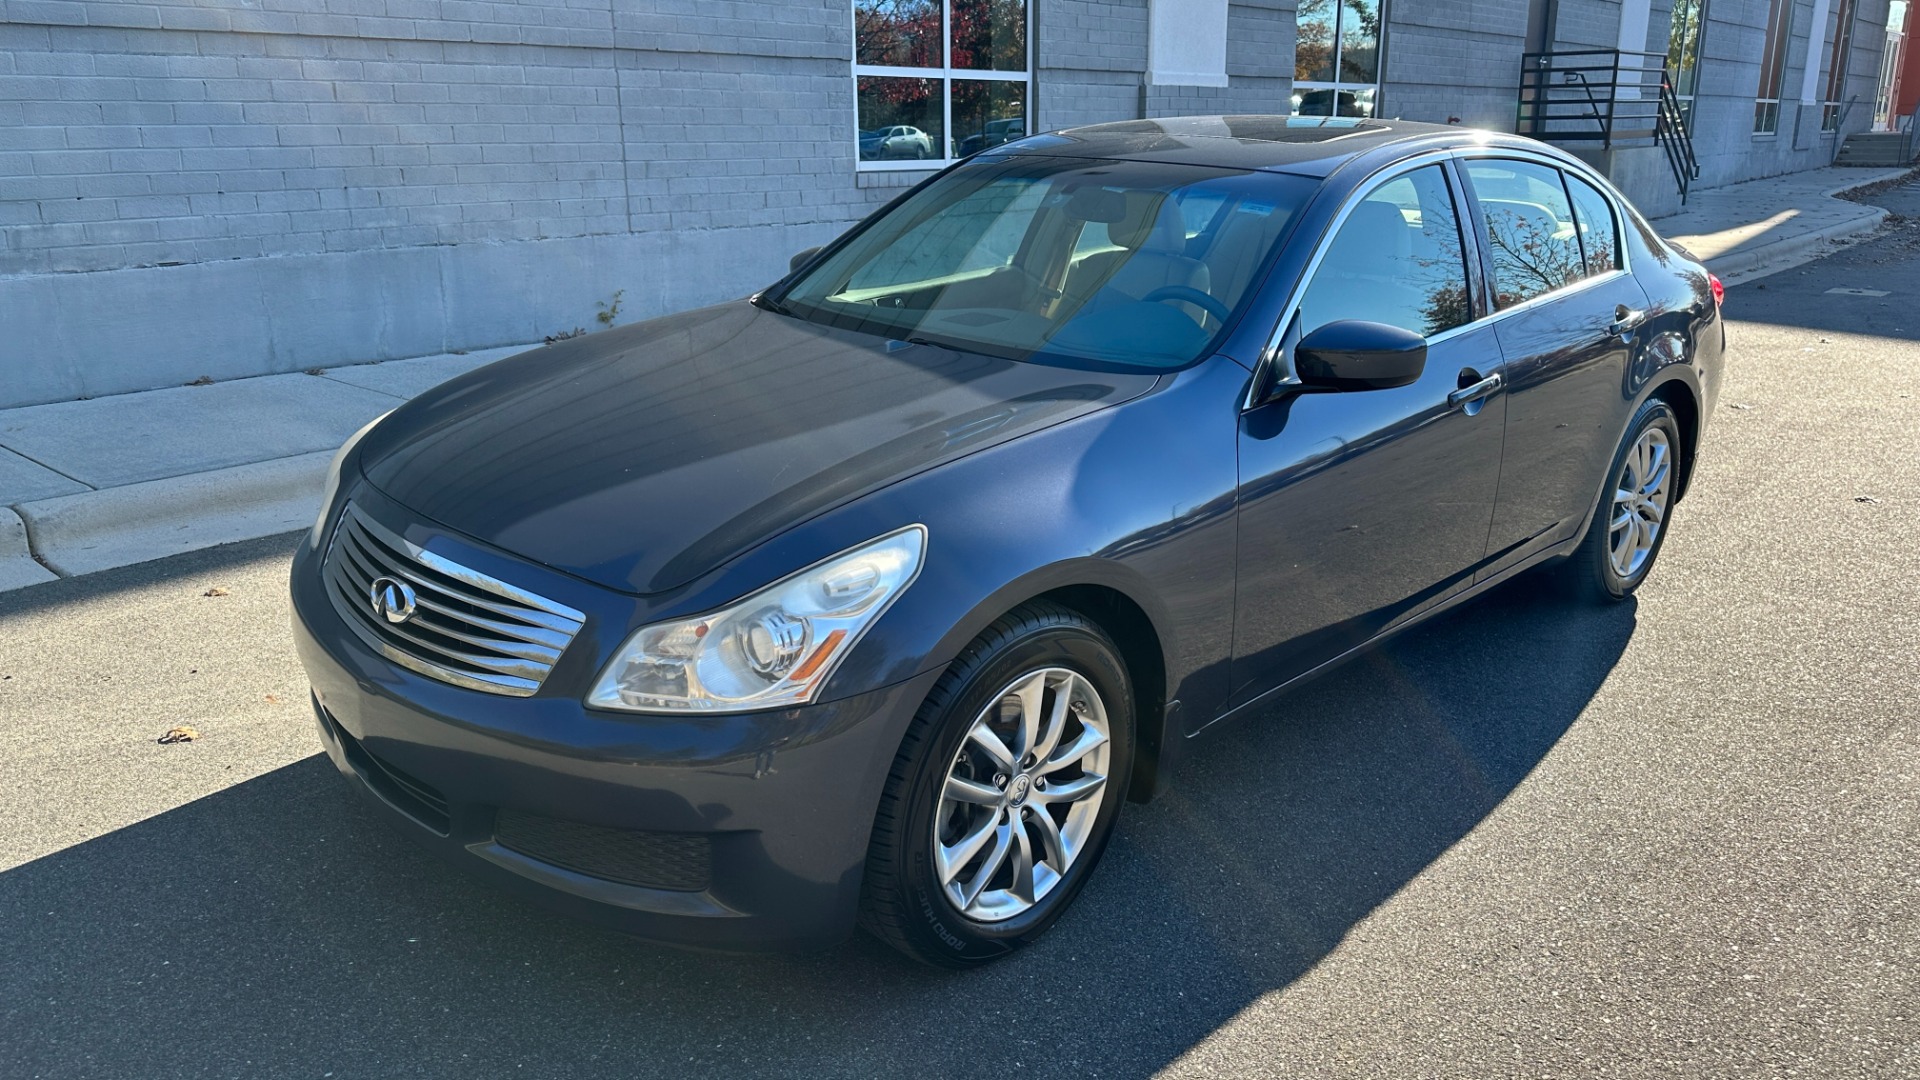 Used 2009 INFINITI G37 Sedan X / AWD / PREMIUM PACKAGE / BOSE / LEATHER / 3.7L V6 / WOOD TRIM for sale $6,200 at Formula Imports in Charlotte NC 28227 2